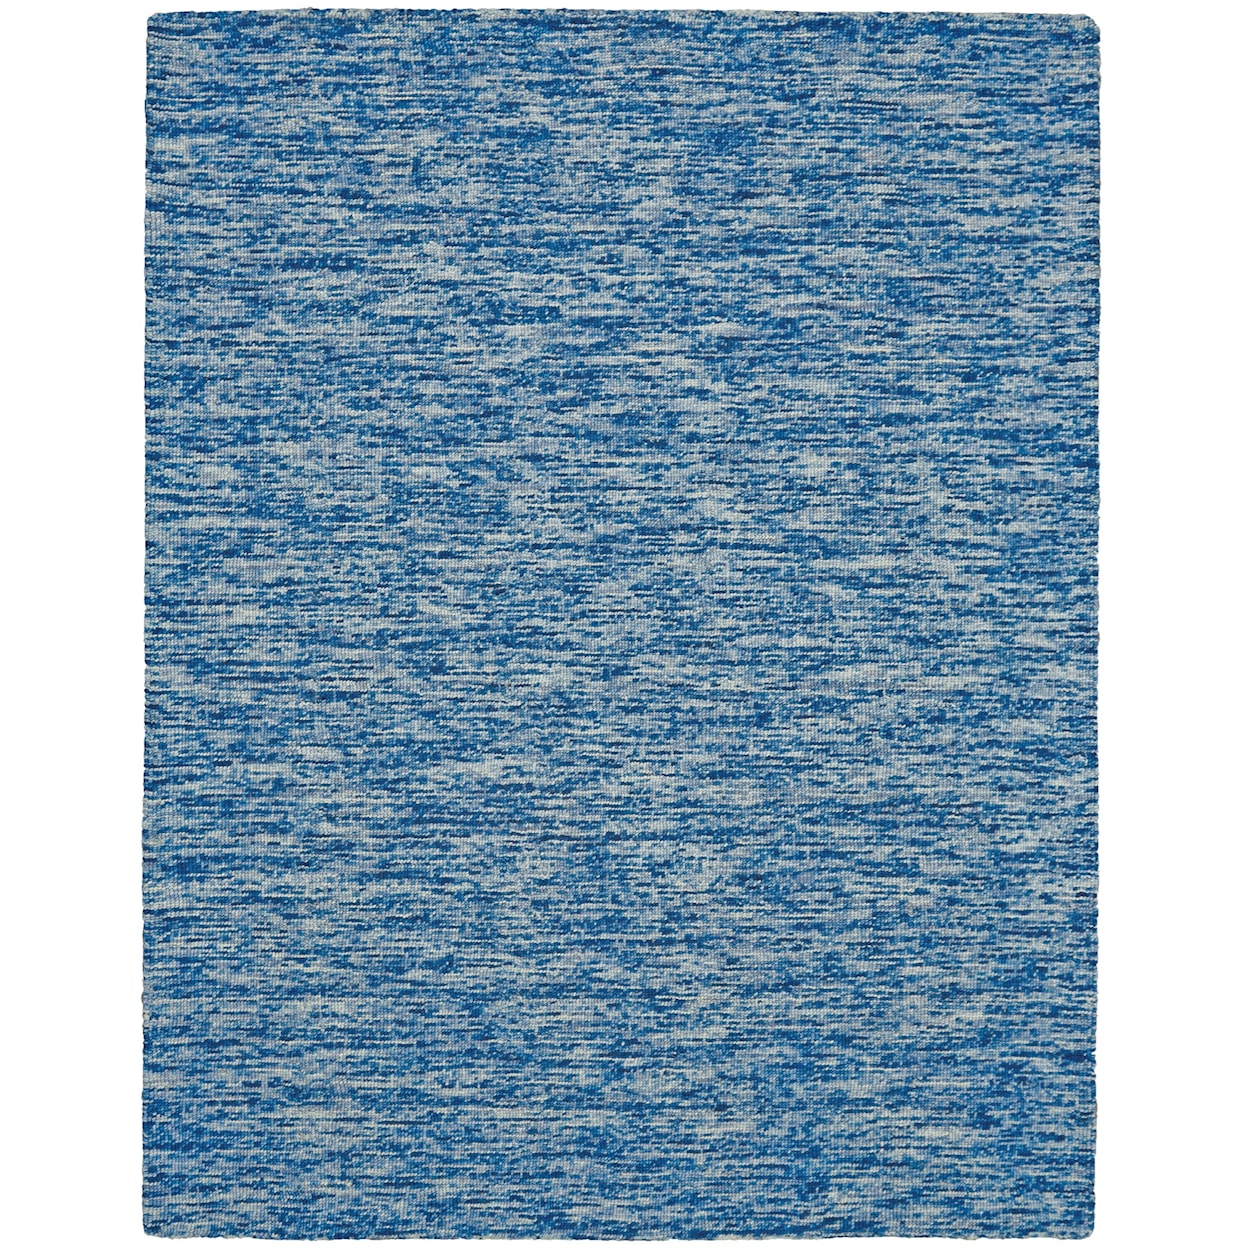 Feizy Rugs Cora Azure 9'-6" x 13'-6" Area Rug